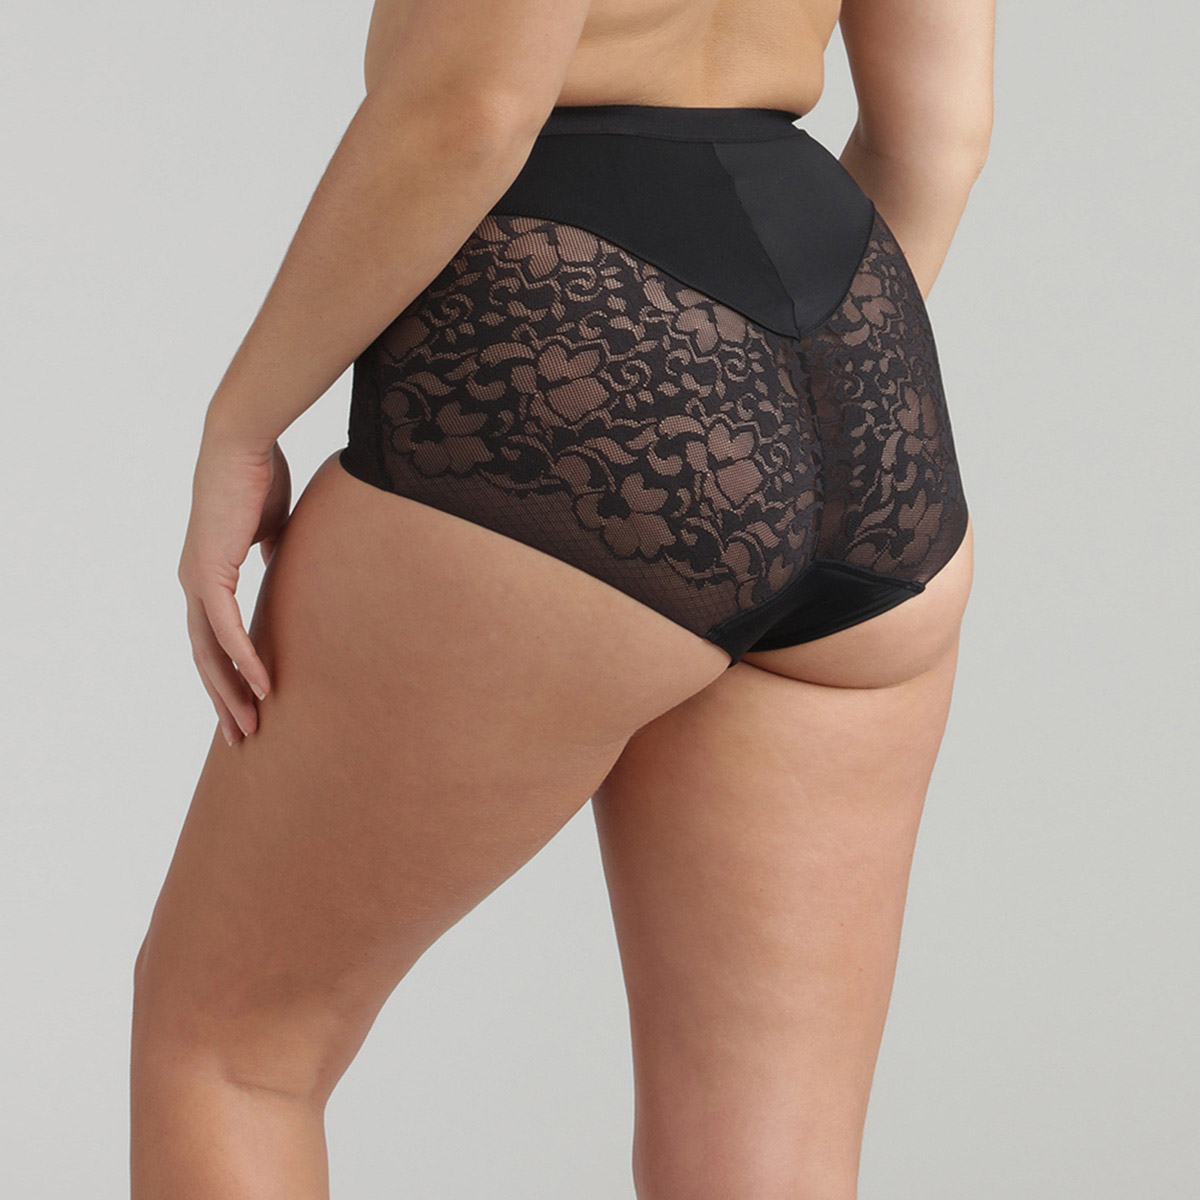 Culotte taille haute noire - Expert in Silhouette, , PLAYTEX